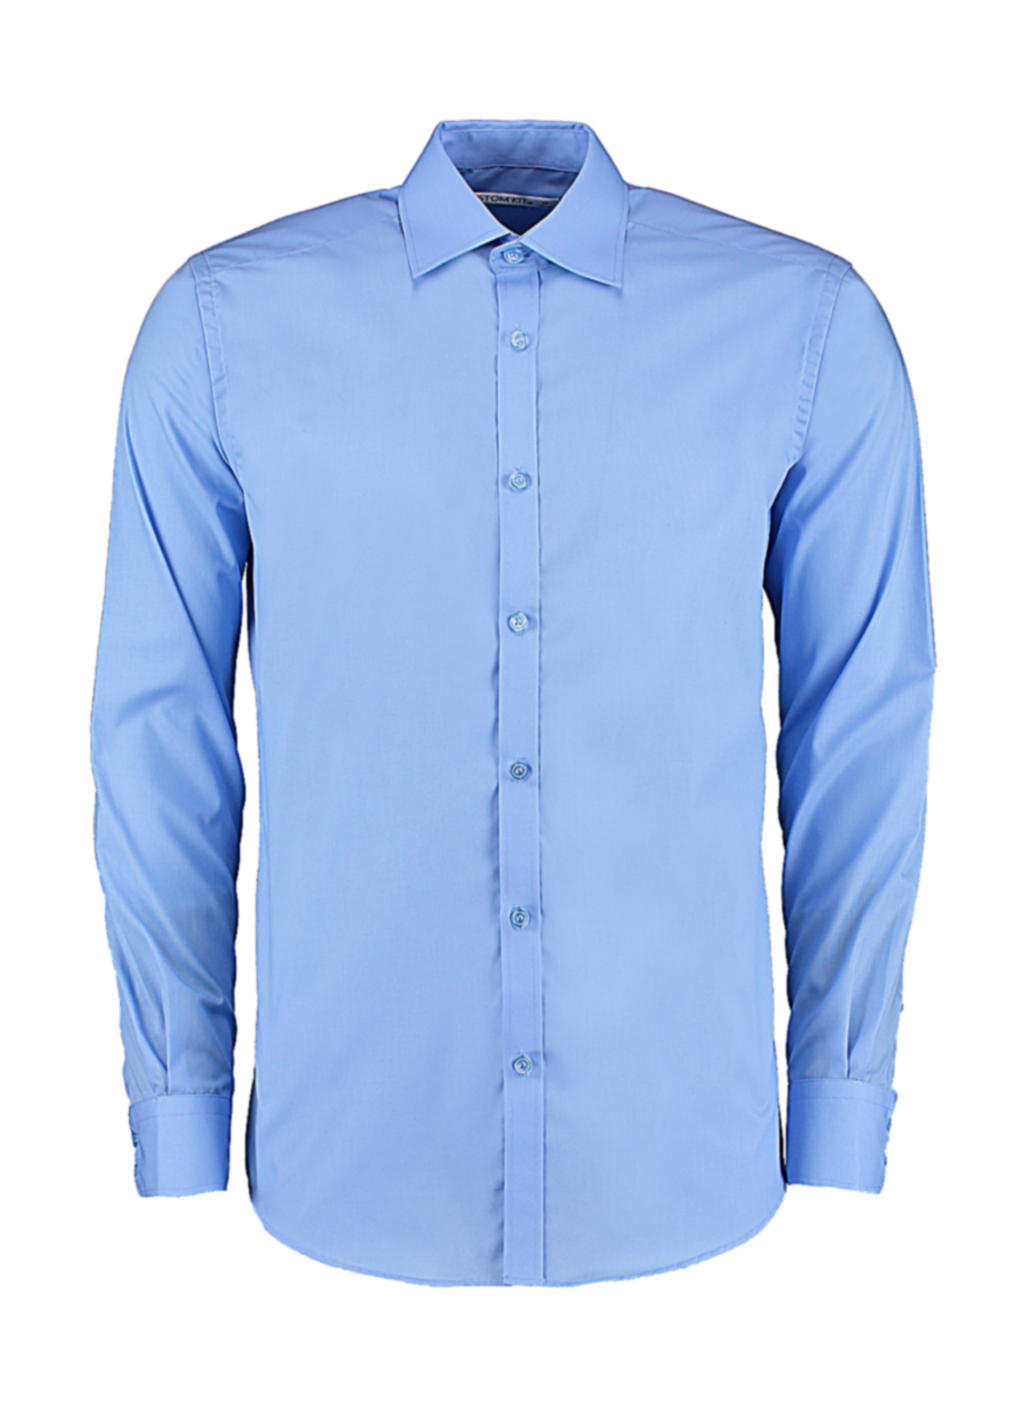  Slim Fit Business Shirt LS in Farbe Light Blue